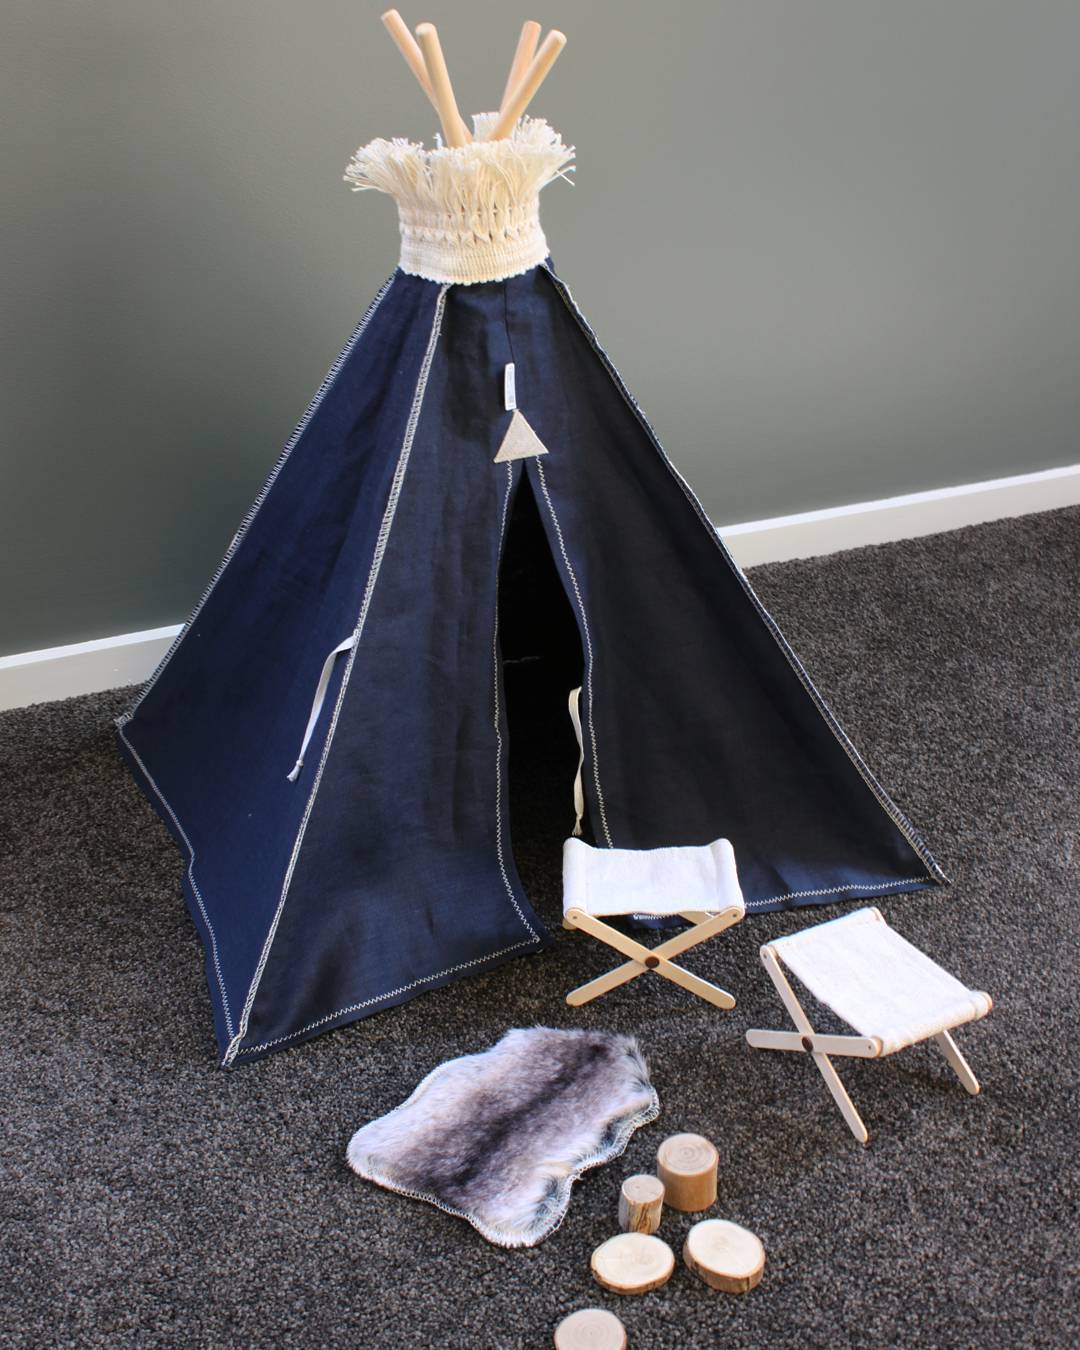 Pint Sized Goods Teepee Large Accessories - Seat + rug set (only 1 left!)